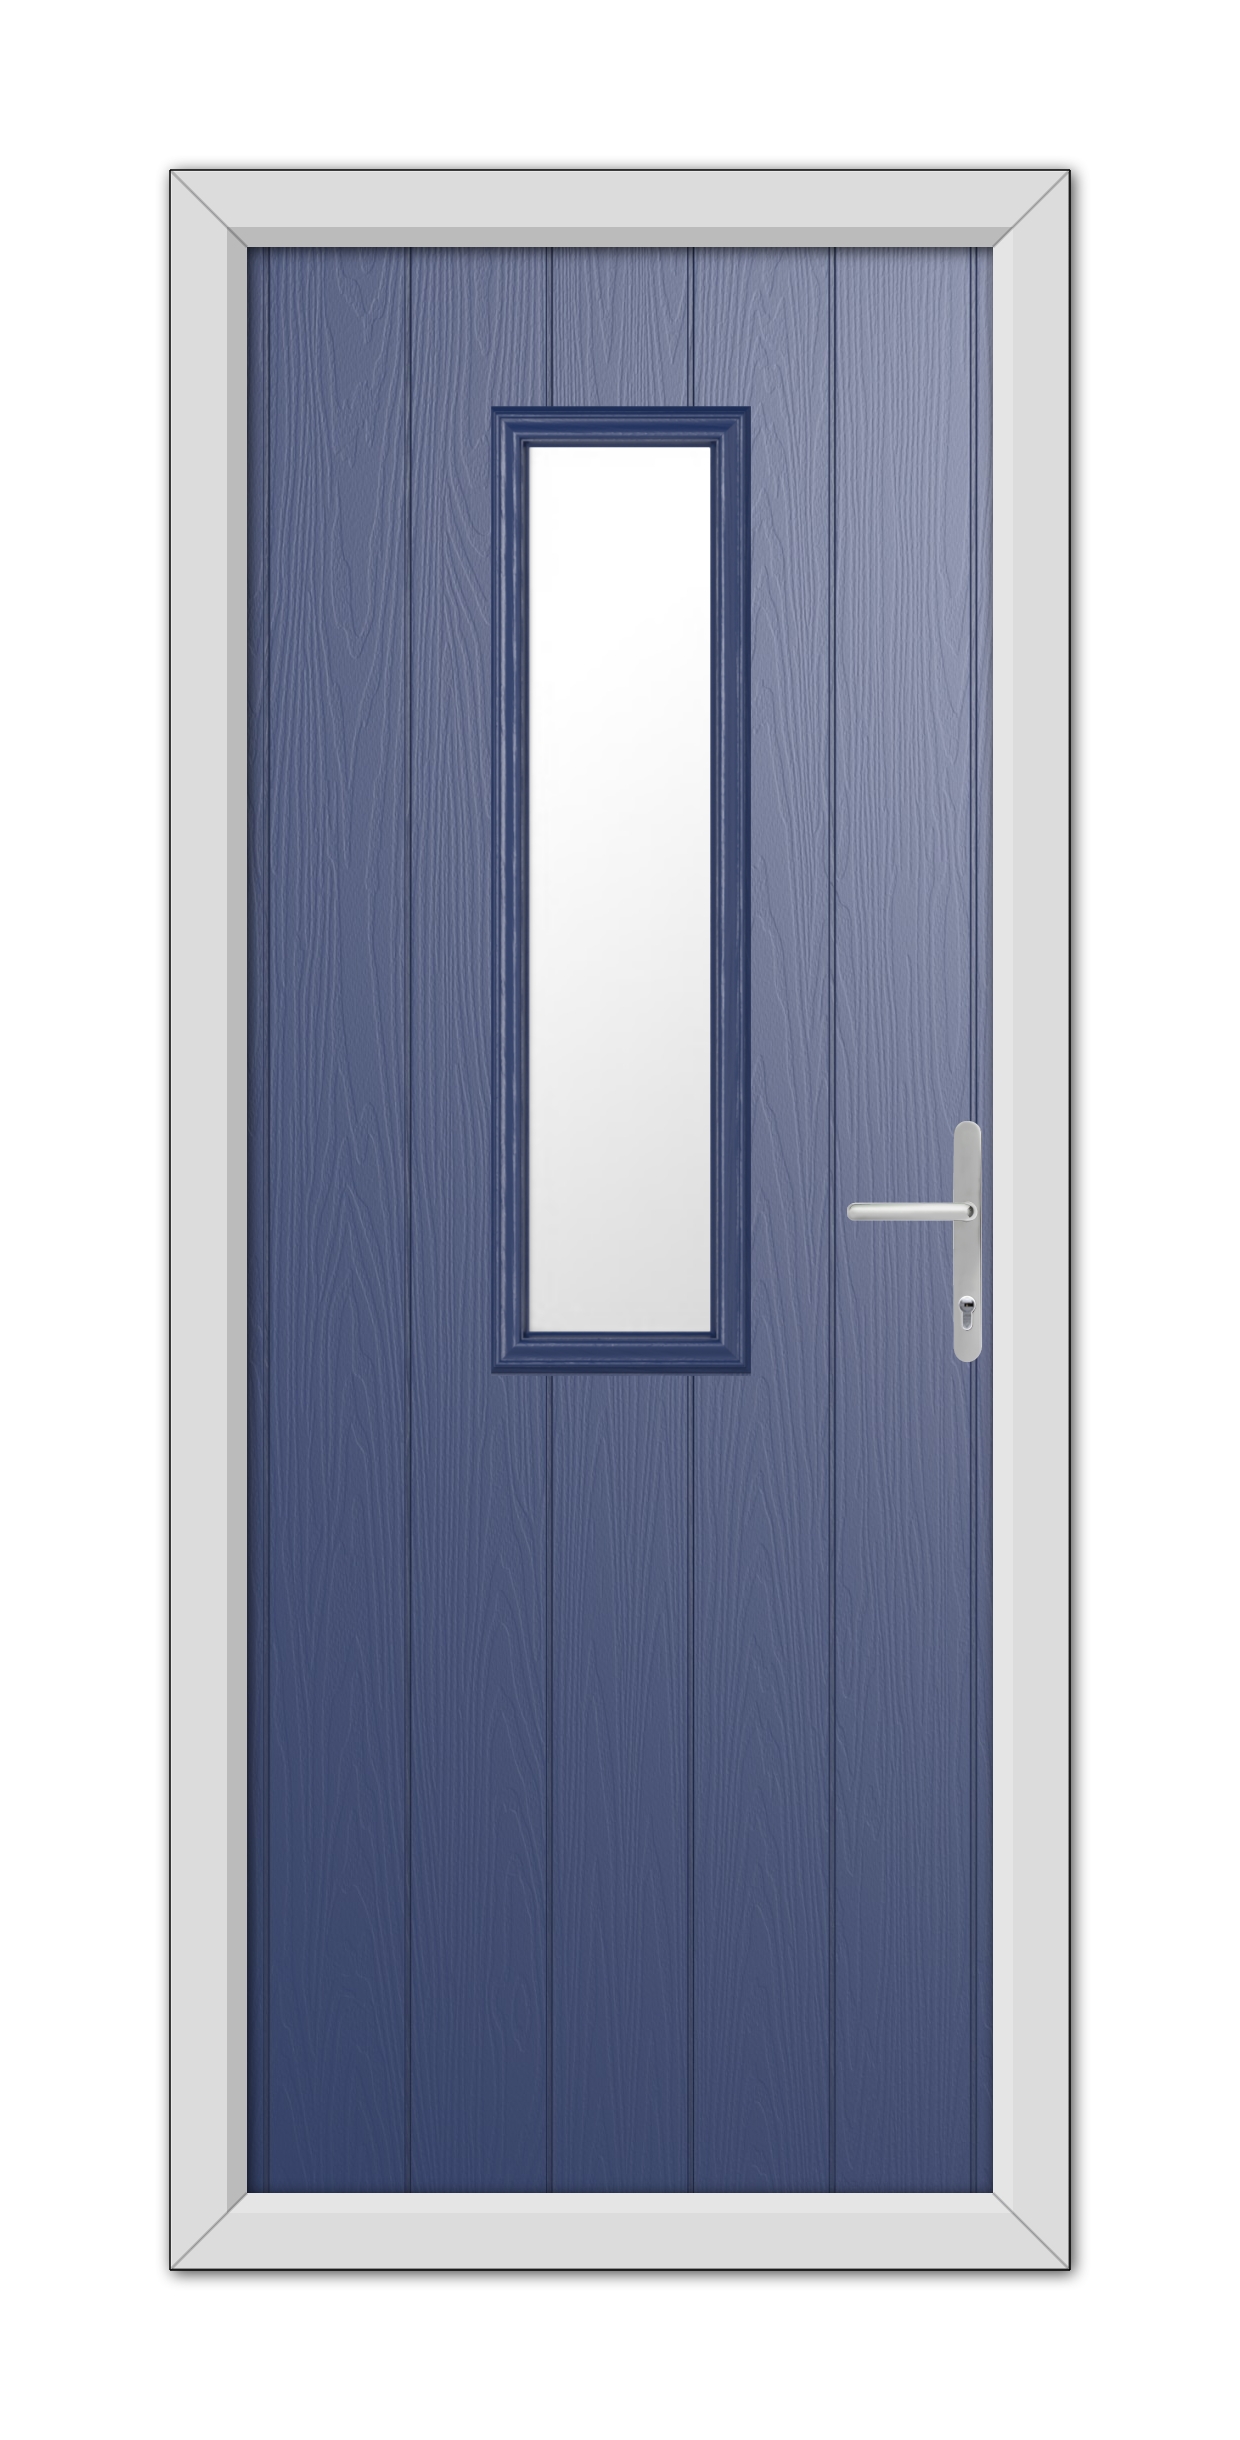 A Blue Mowbray Composite Door 48mm Timber Core with a vertical rectangular window and a silver handle, framed within a white door frame.